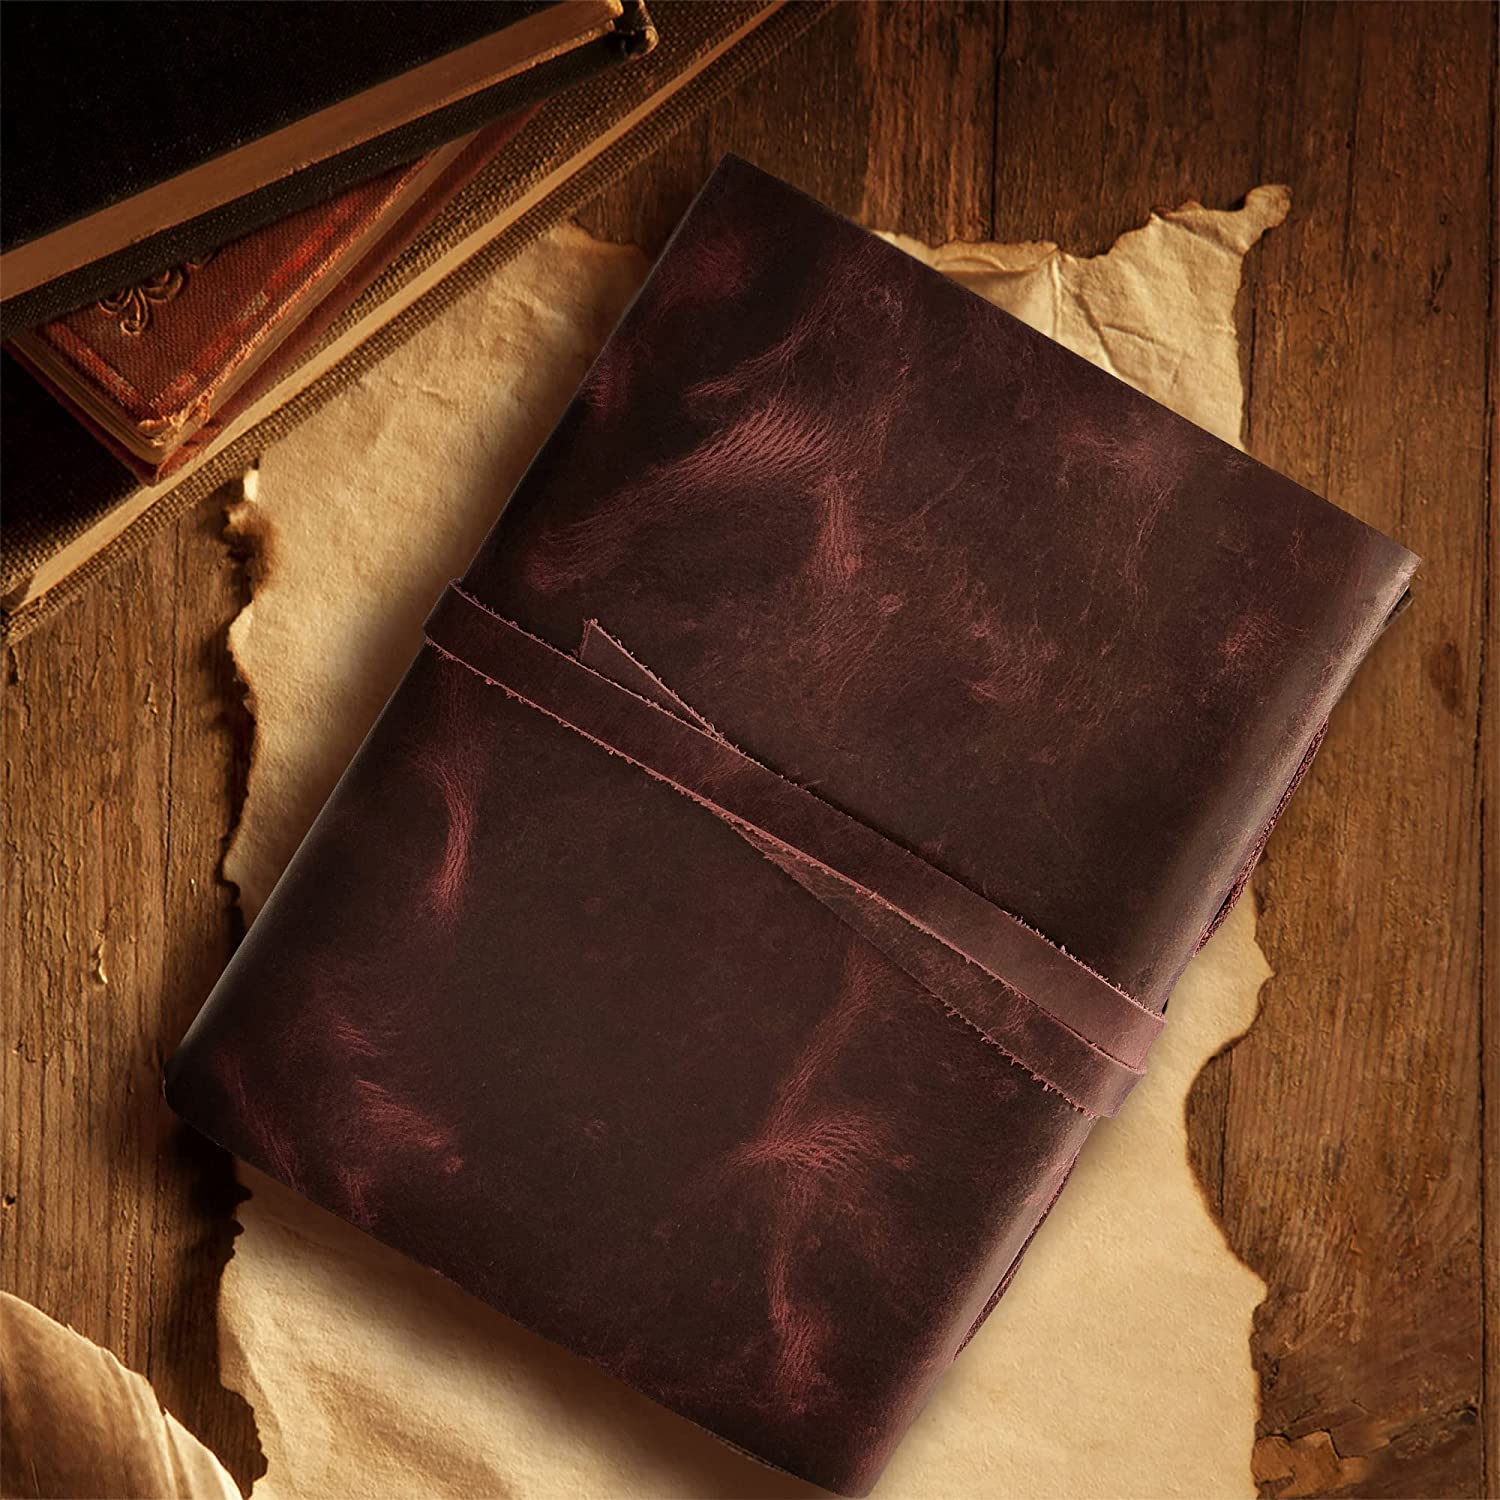 Leather Bound Journal - A5 Handmade Antique Deckle Edge Paper - Leather Sketchbook - Book of Shadows Journal - Thick Journal - Vintage Travel Diary for Men Women, Mauve - image 5 of 8